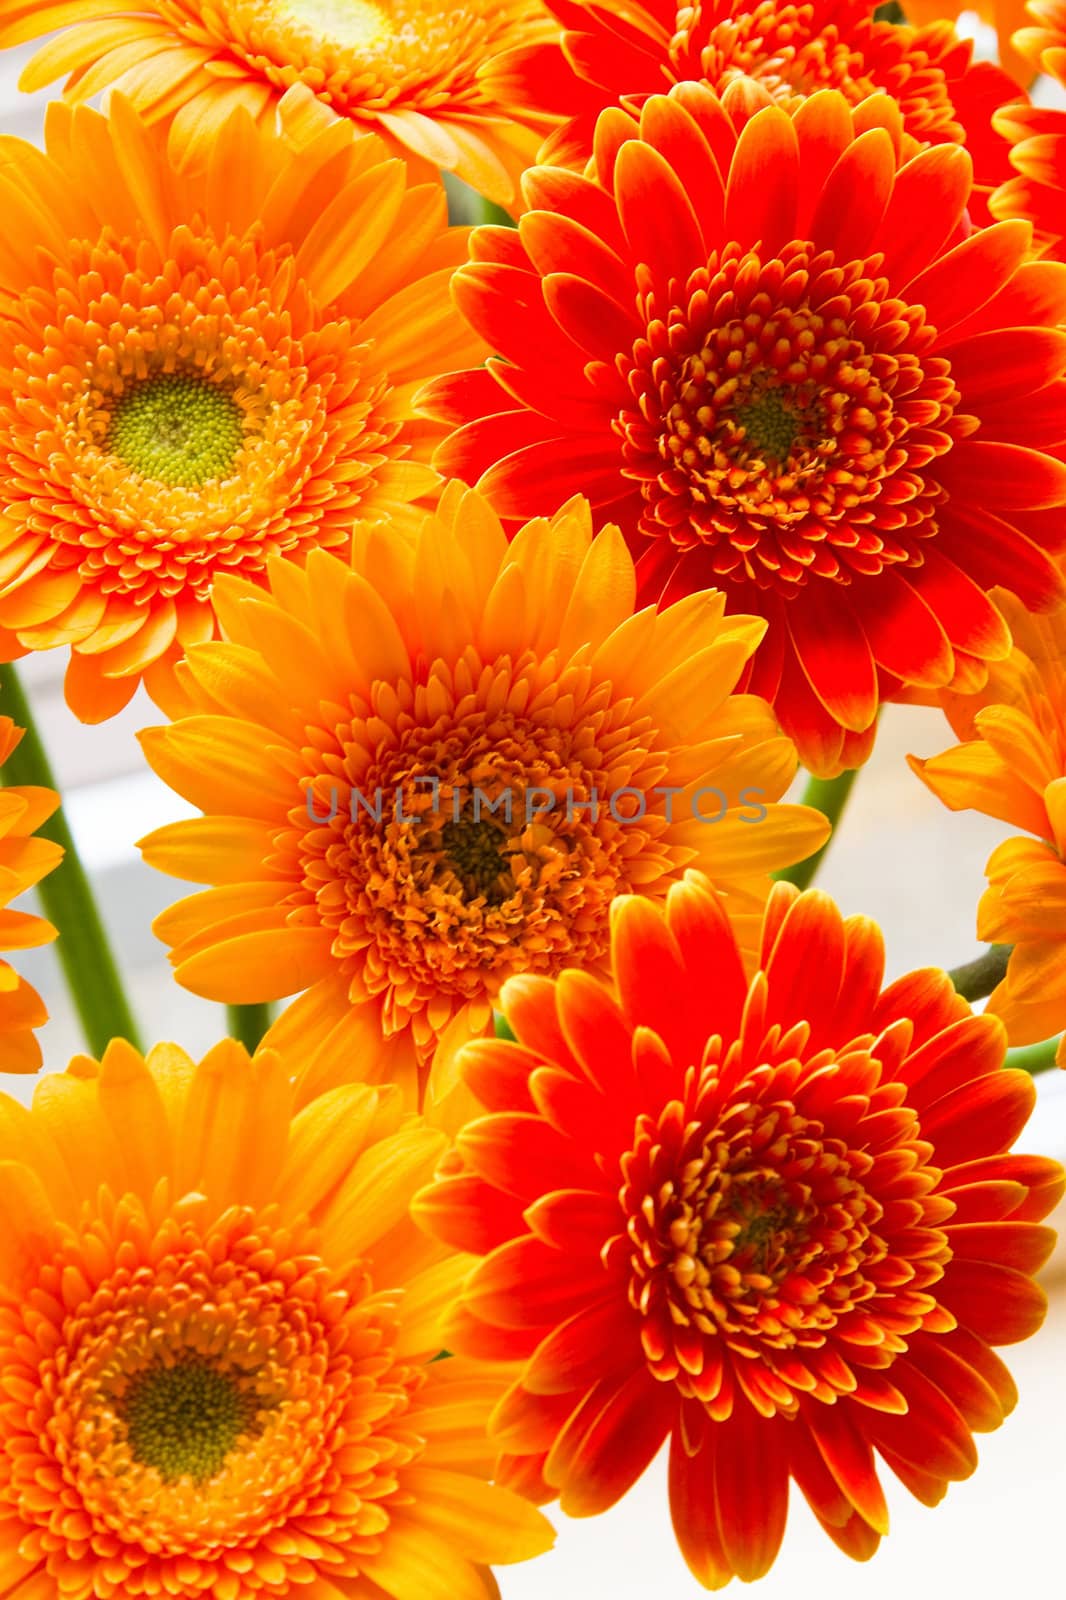 Flaming colors of yellow and red gerberas